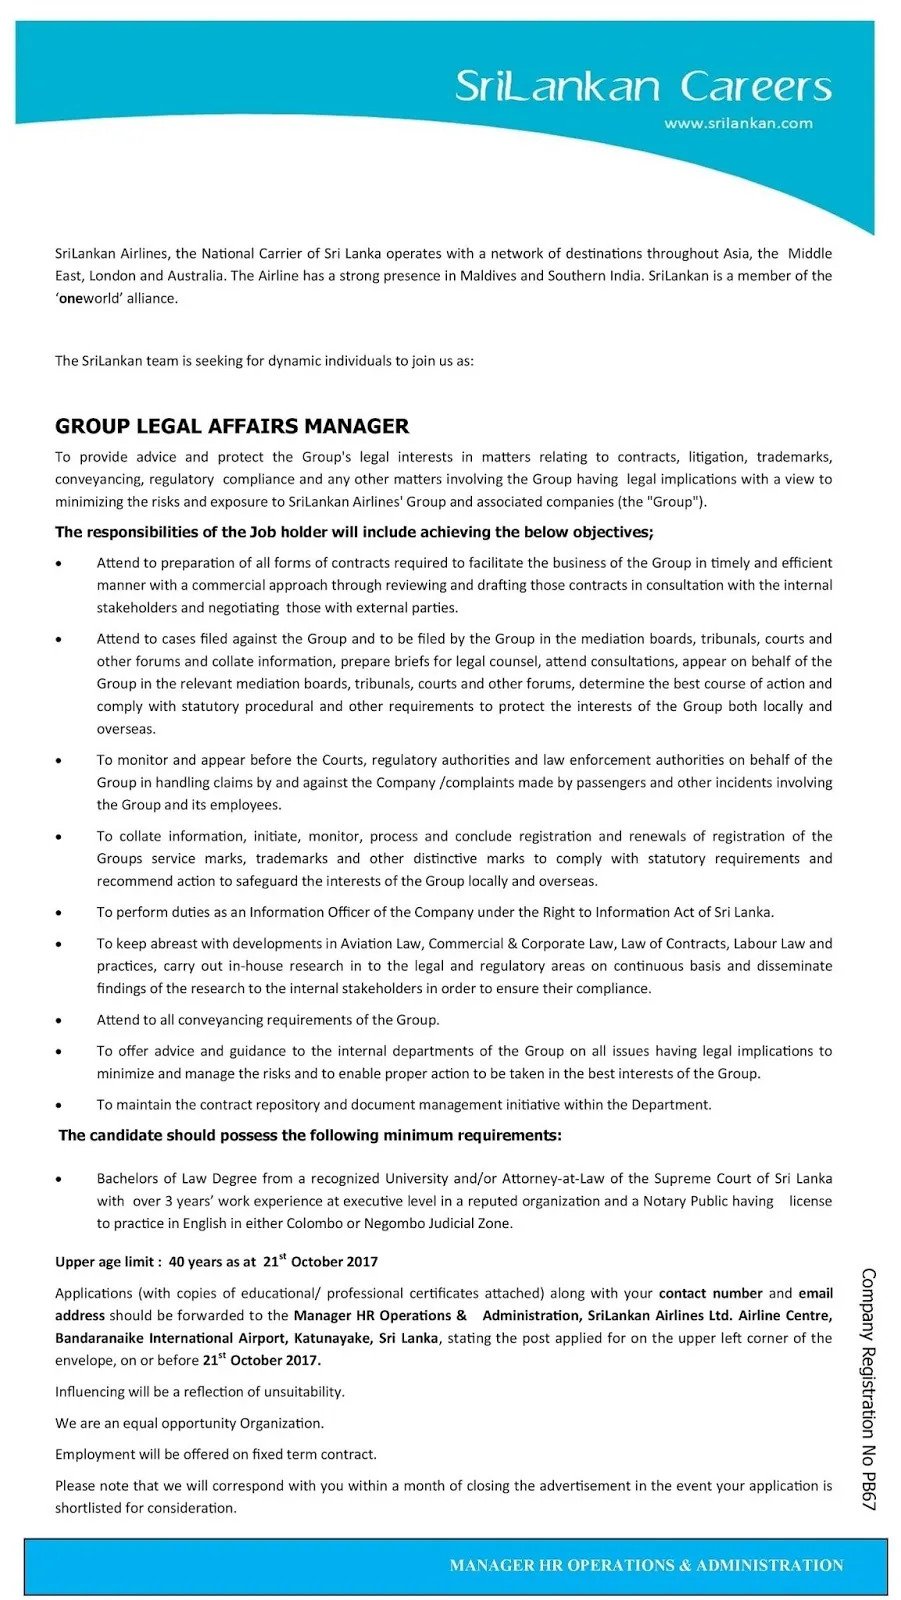 Group Legal Affairs Manager – SriLankan Airlines